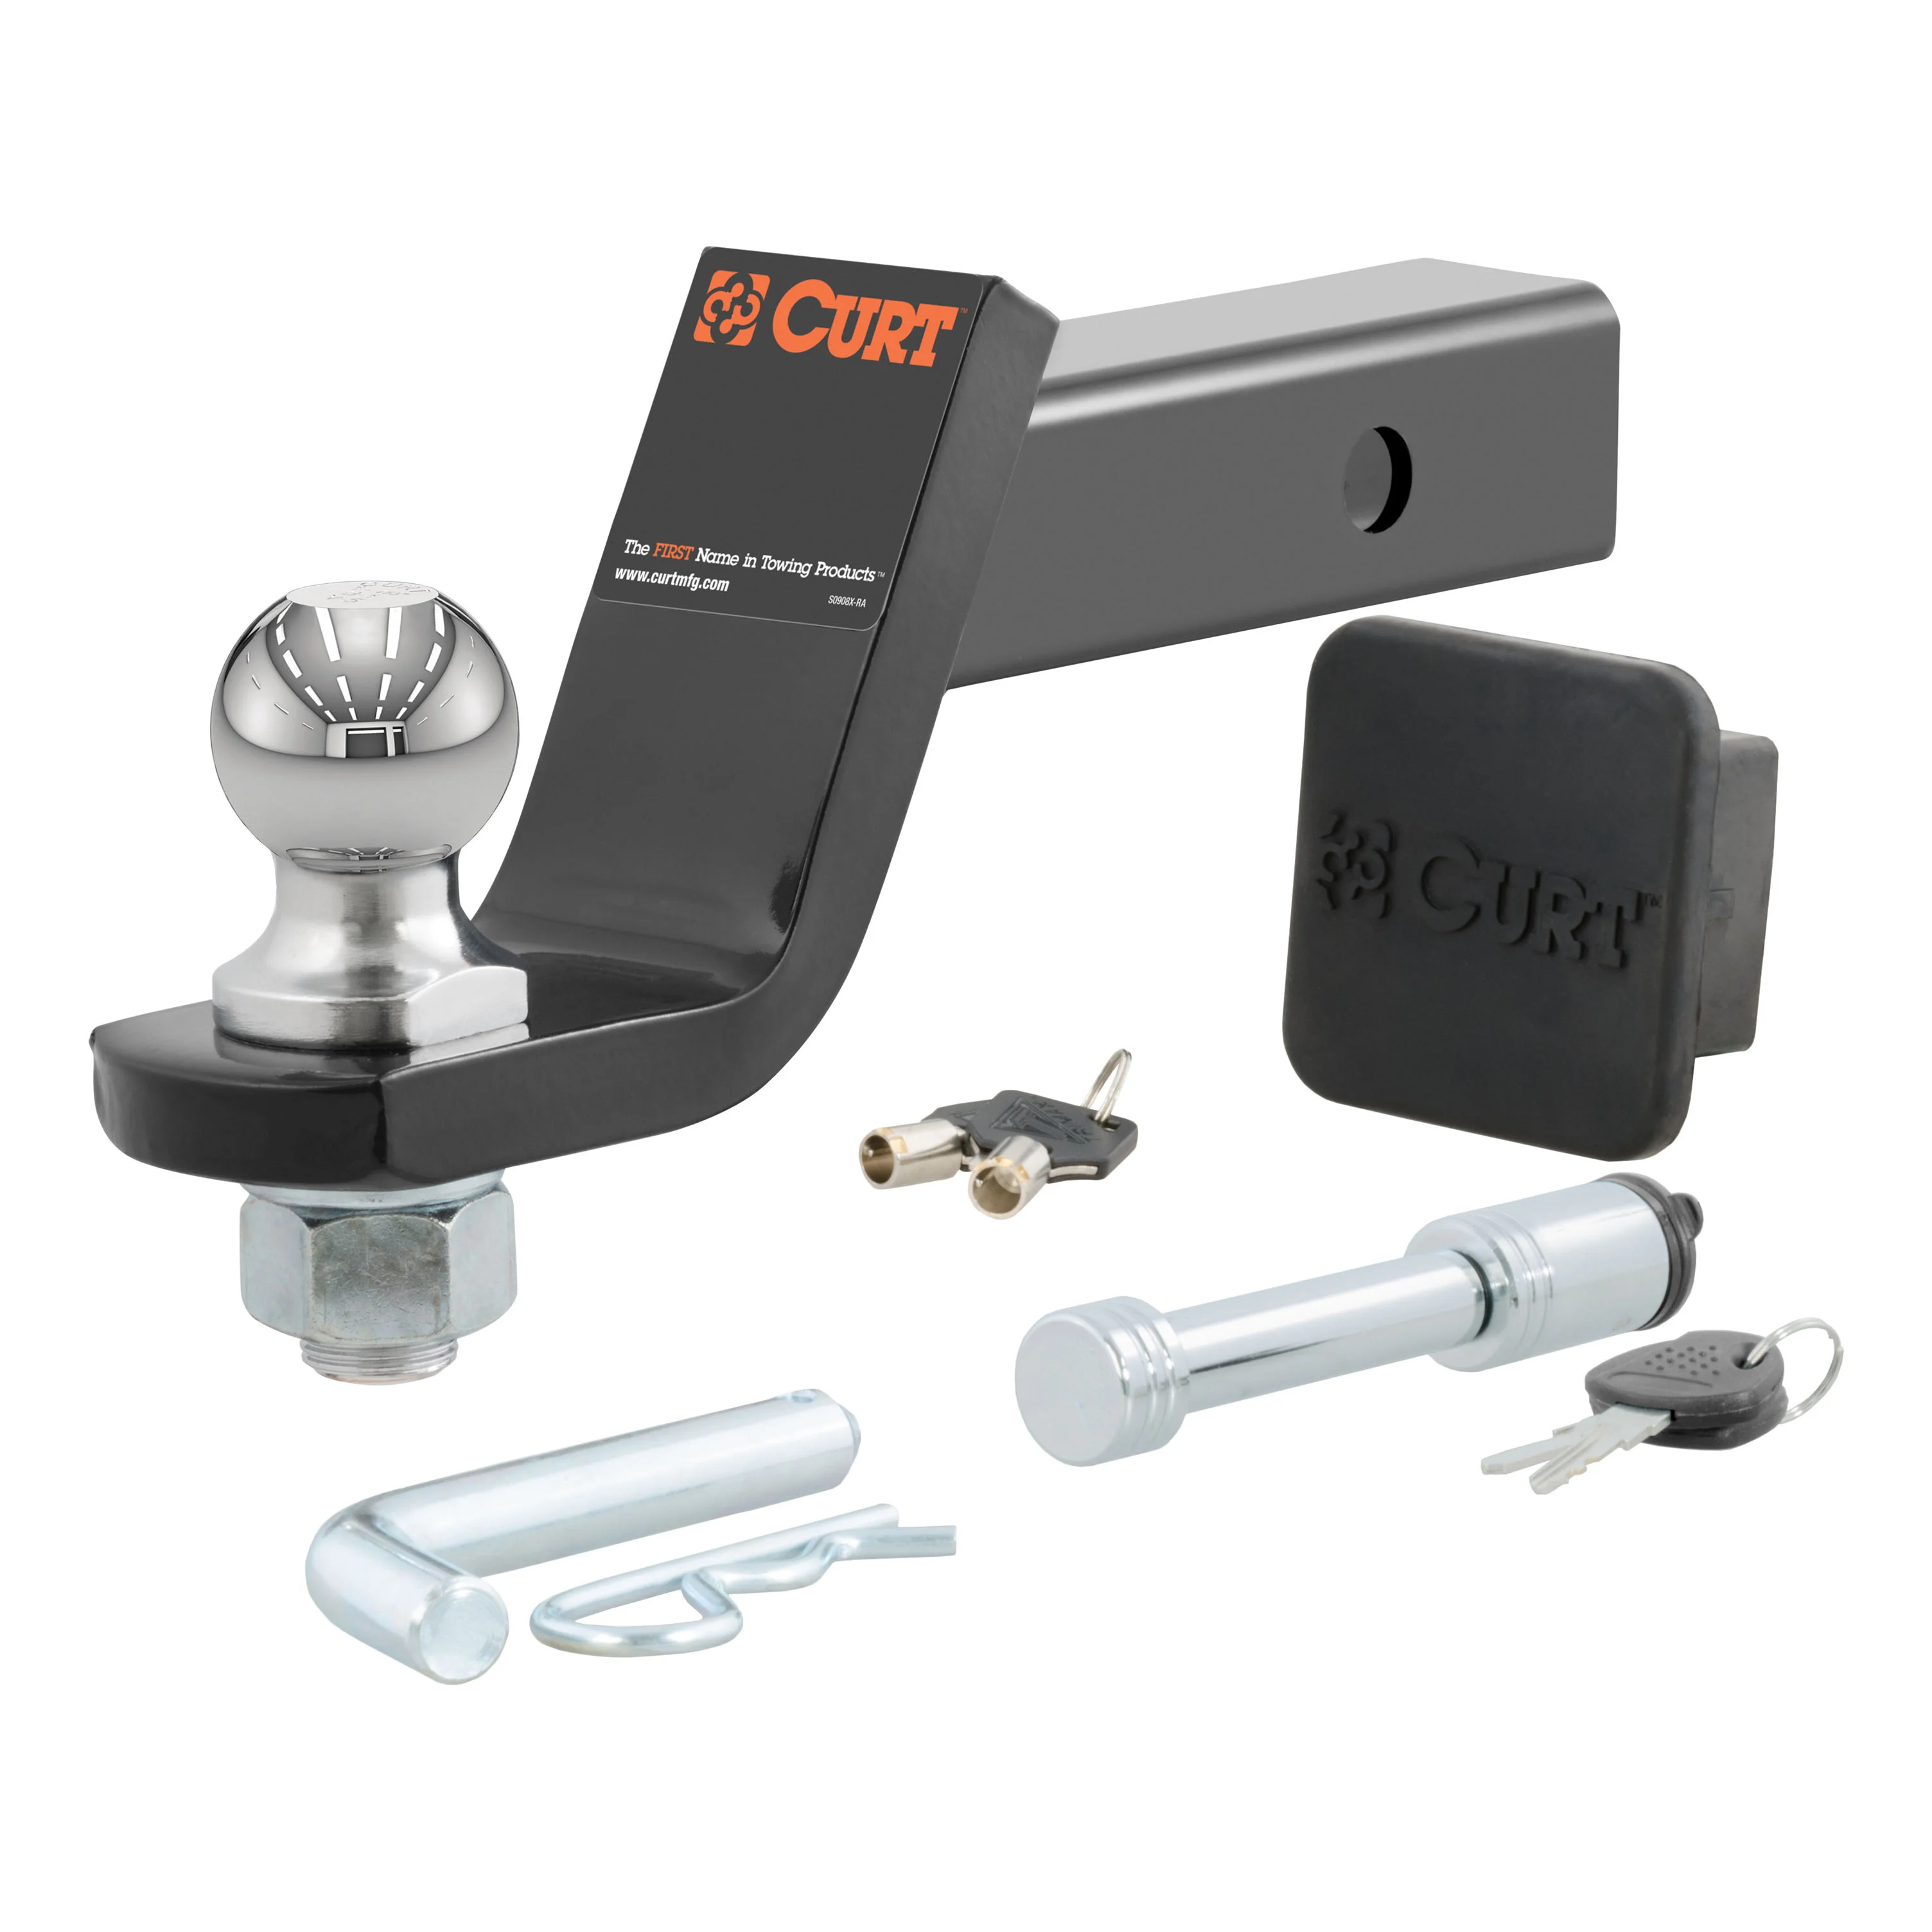 Curt Towing Starter Kit (2-inch ball, 2-inch shank with 4-inch drop)